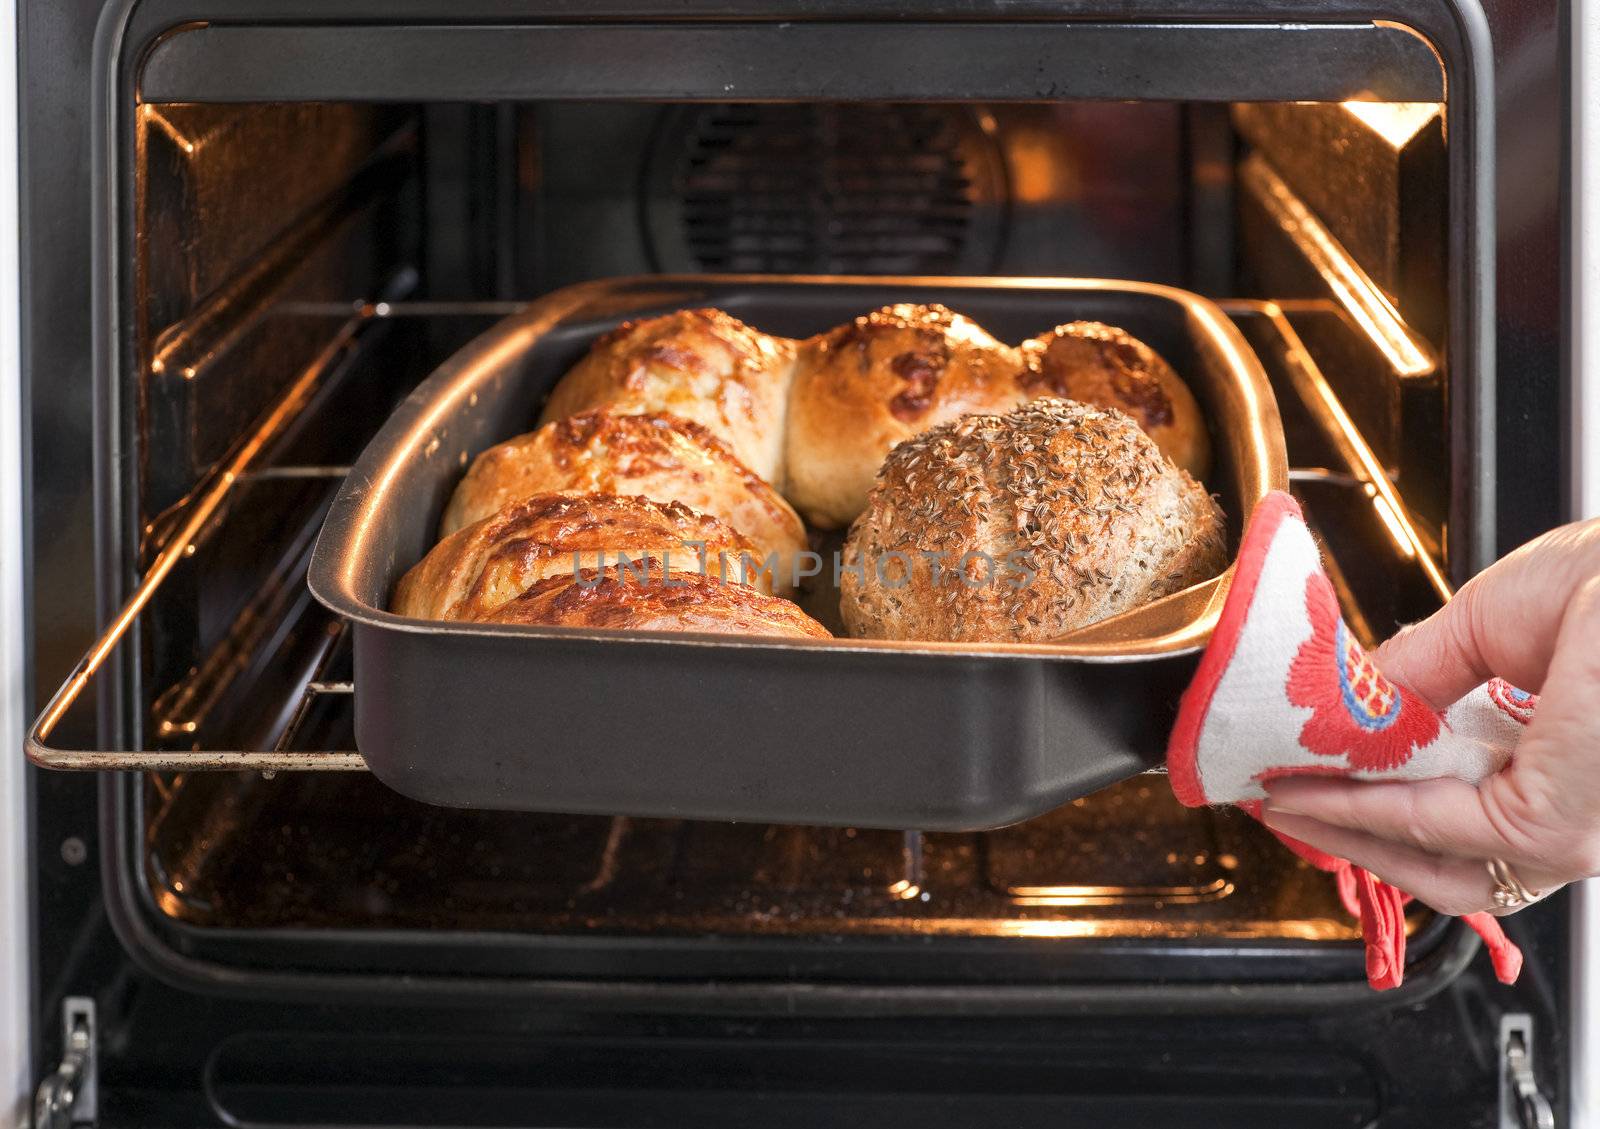 Baker's hand with potholder next to metal cookie sheet with bread in the oven